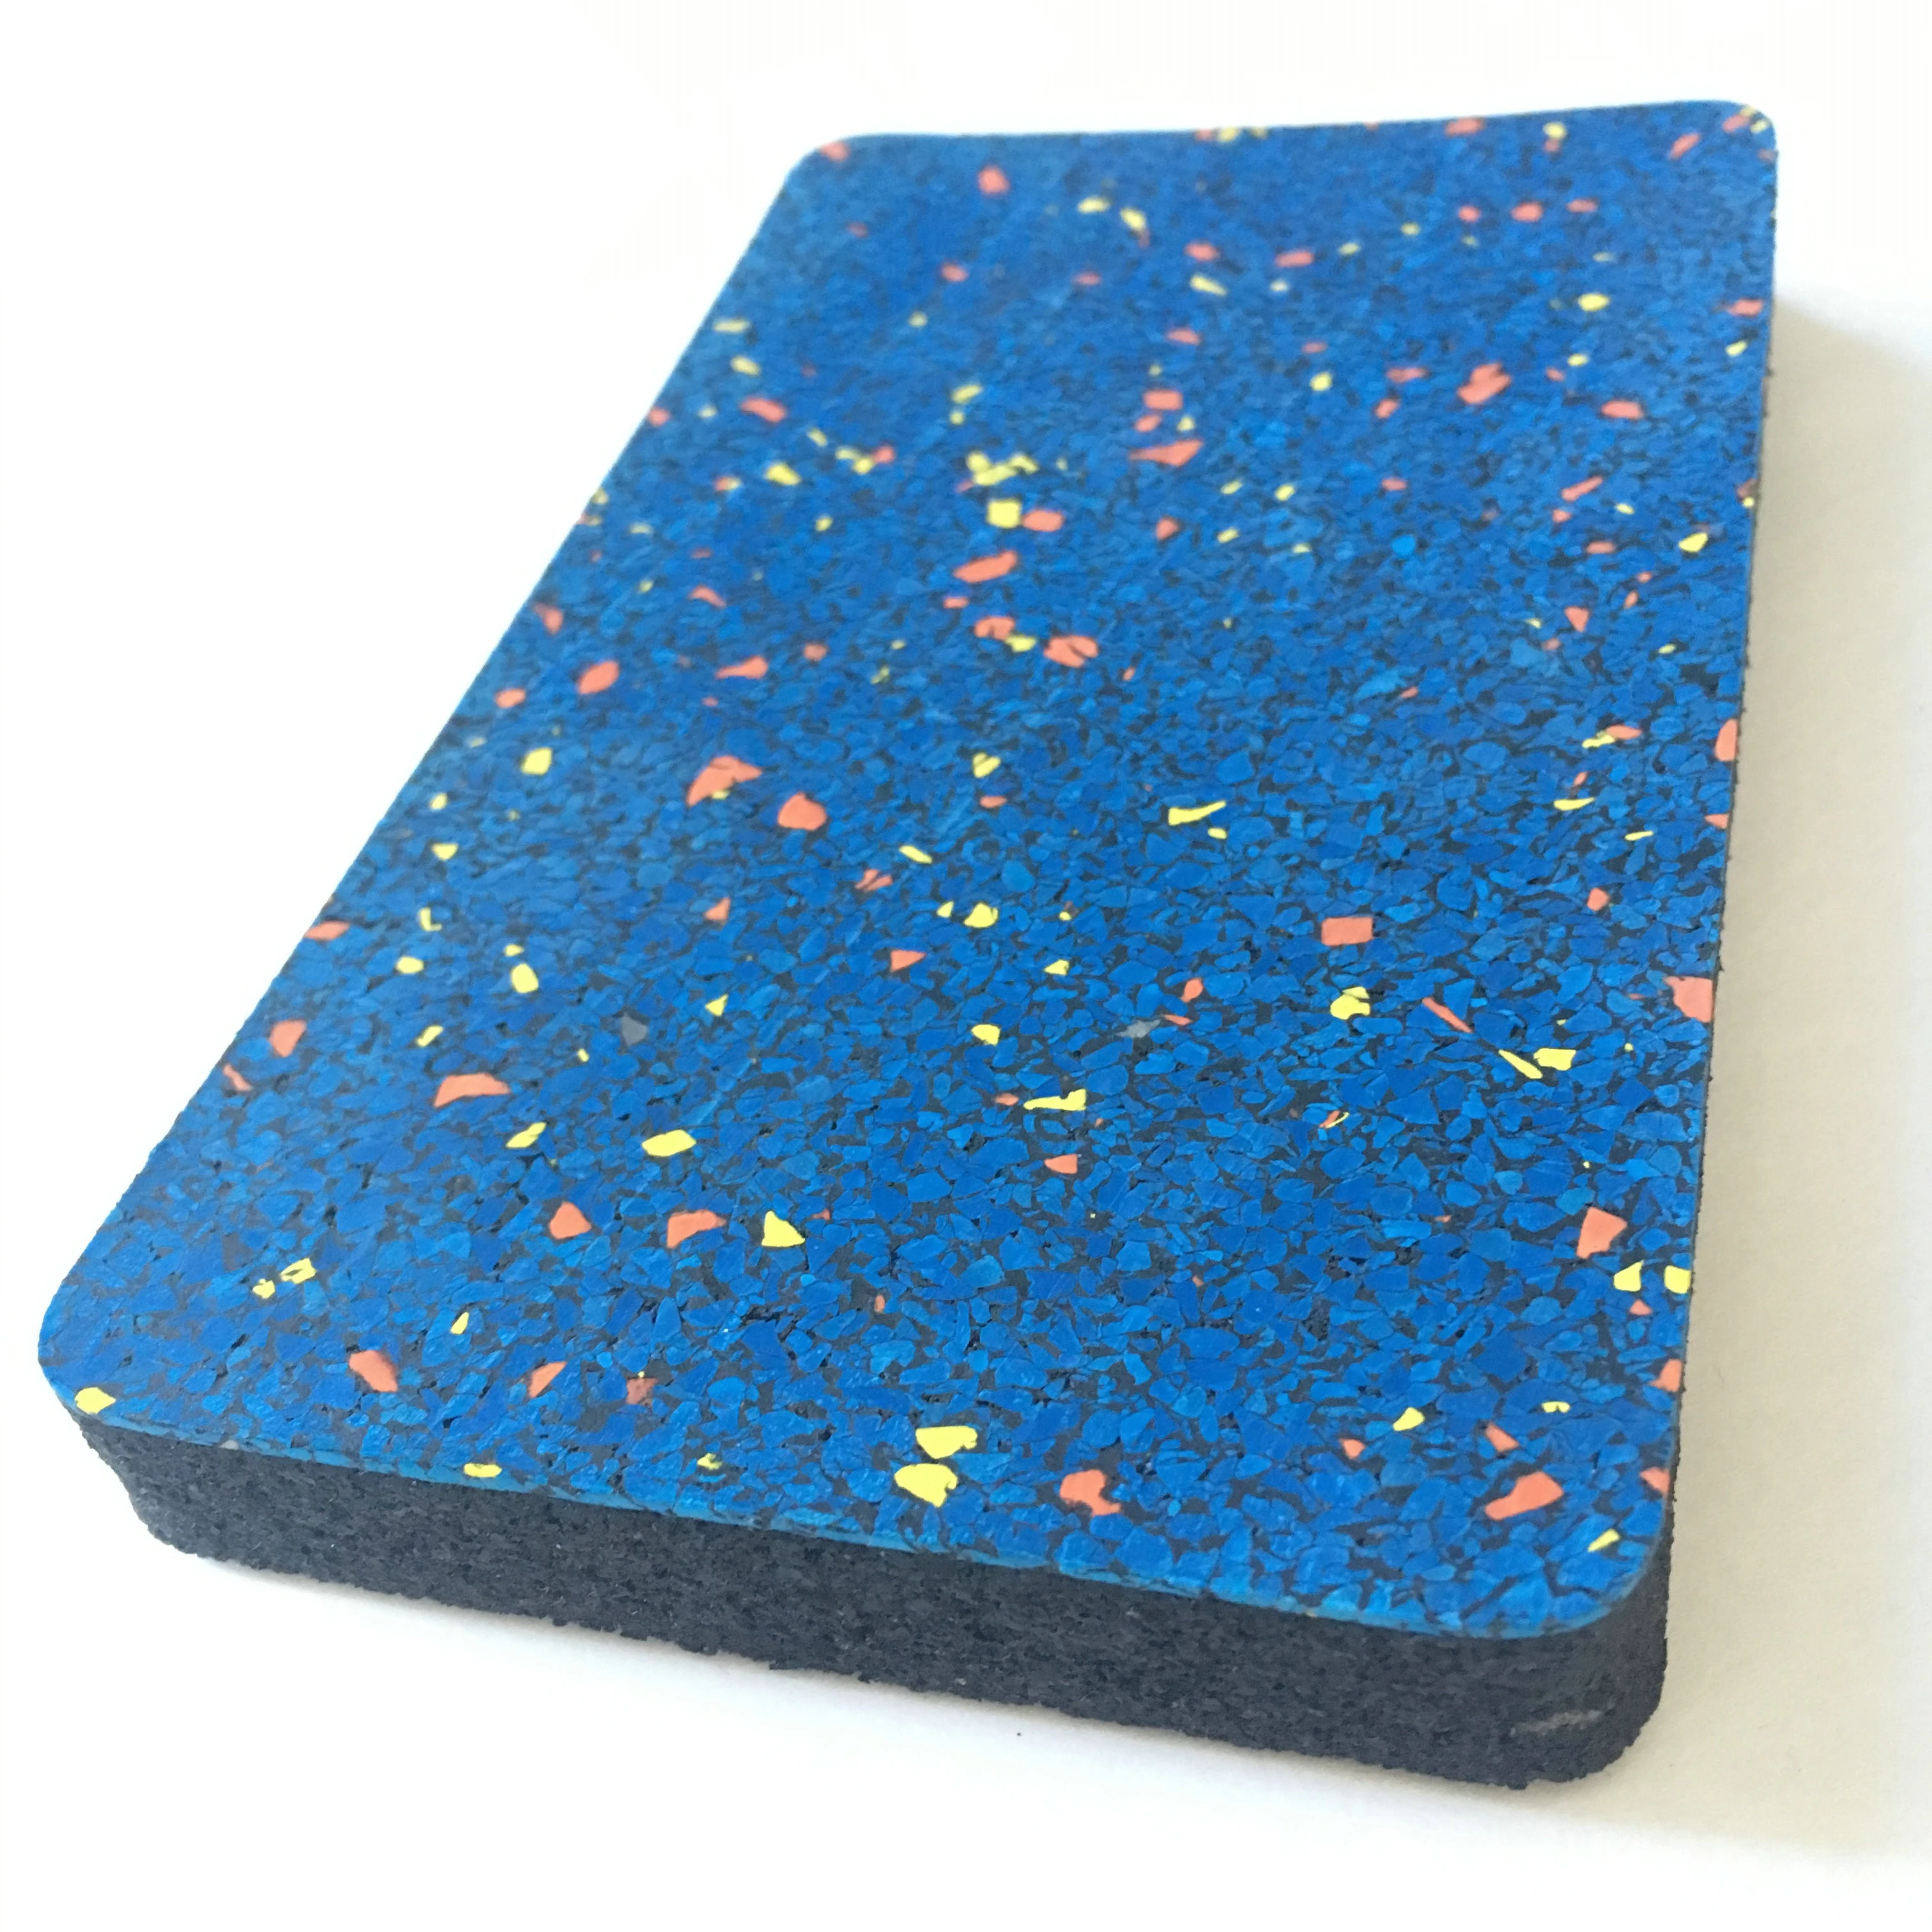 Colorful EPDM Rubber gym flooring tiles for all indoor gym fitness areas